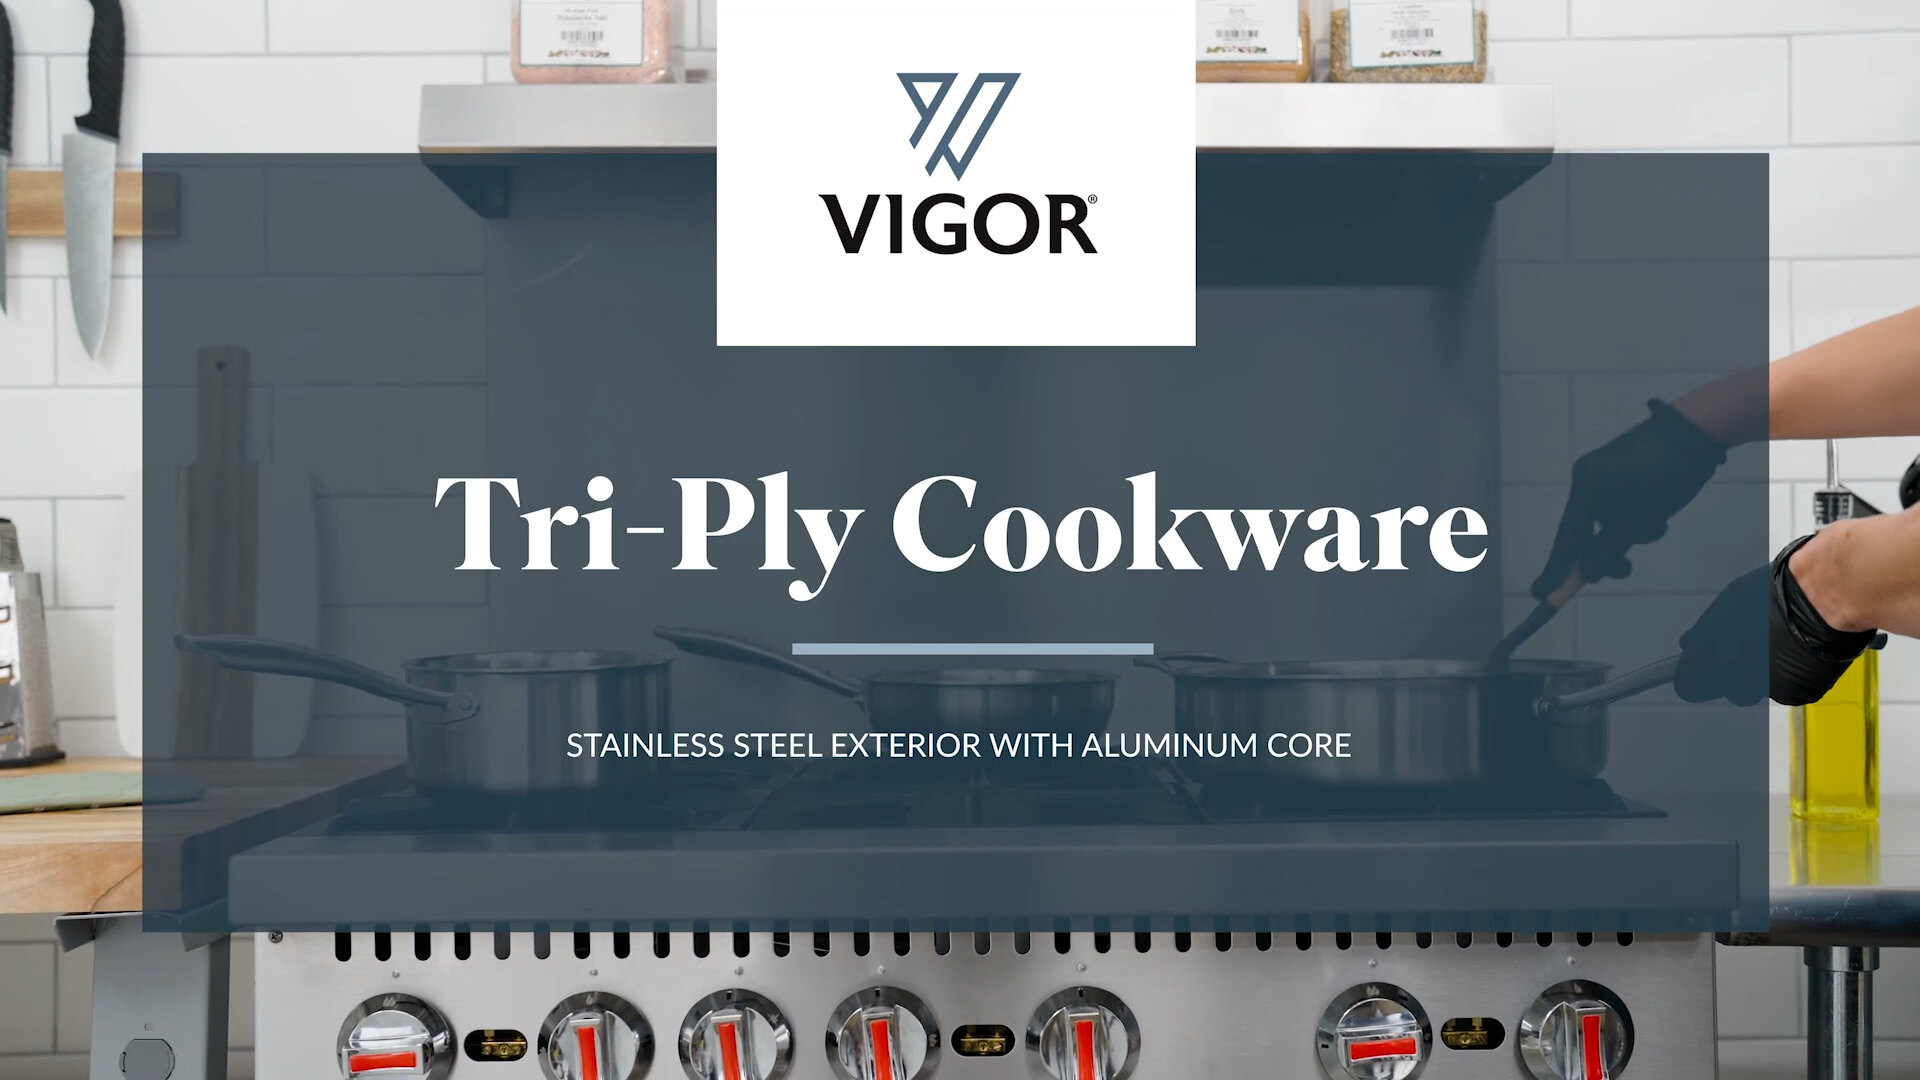 Vigor SS3 Series 12 Tri-Ply Stainless Steel Non-Stick Fry Pan with  Excalibur Coating